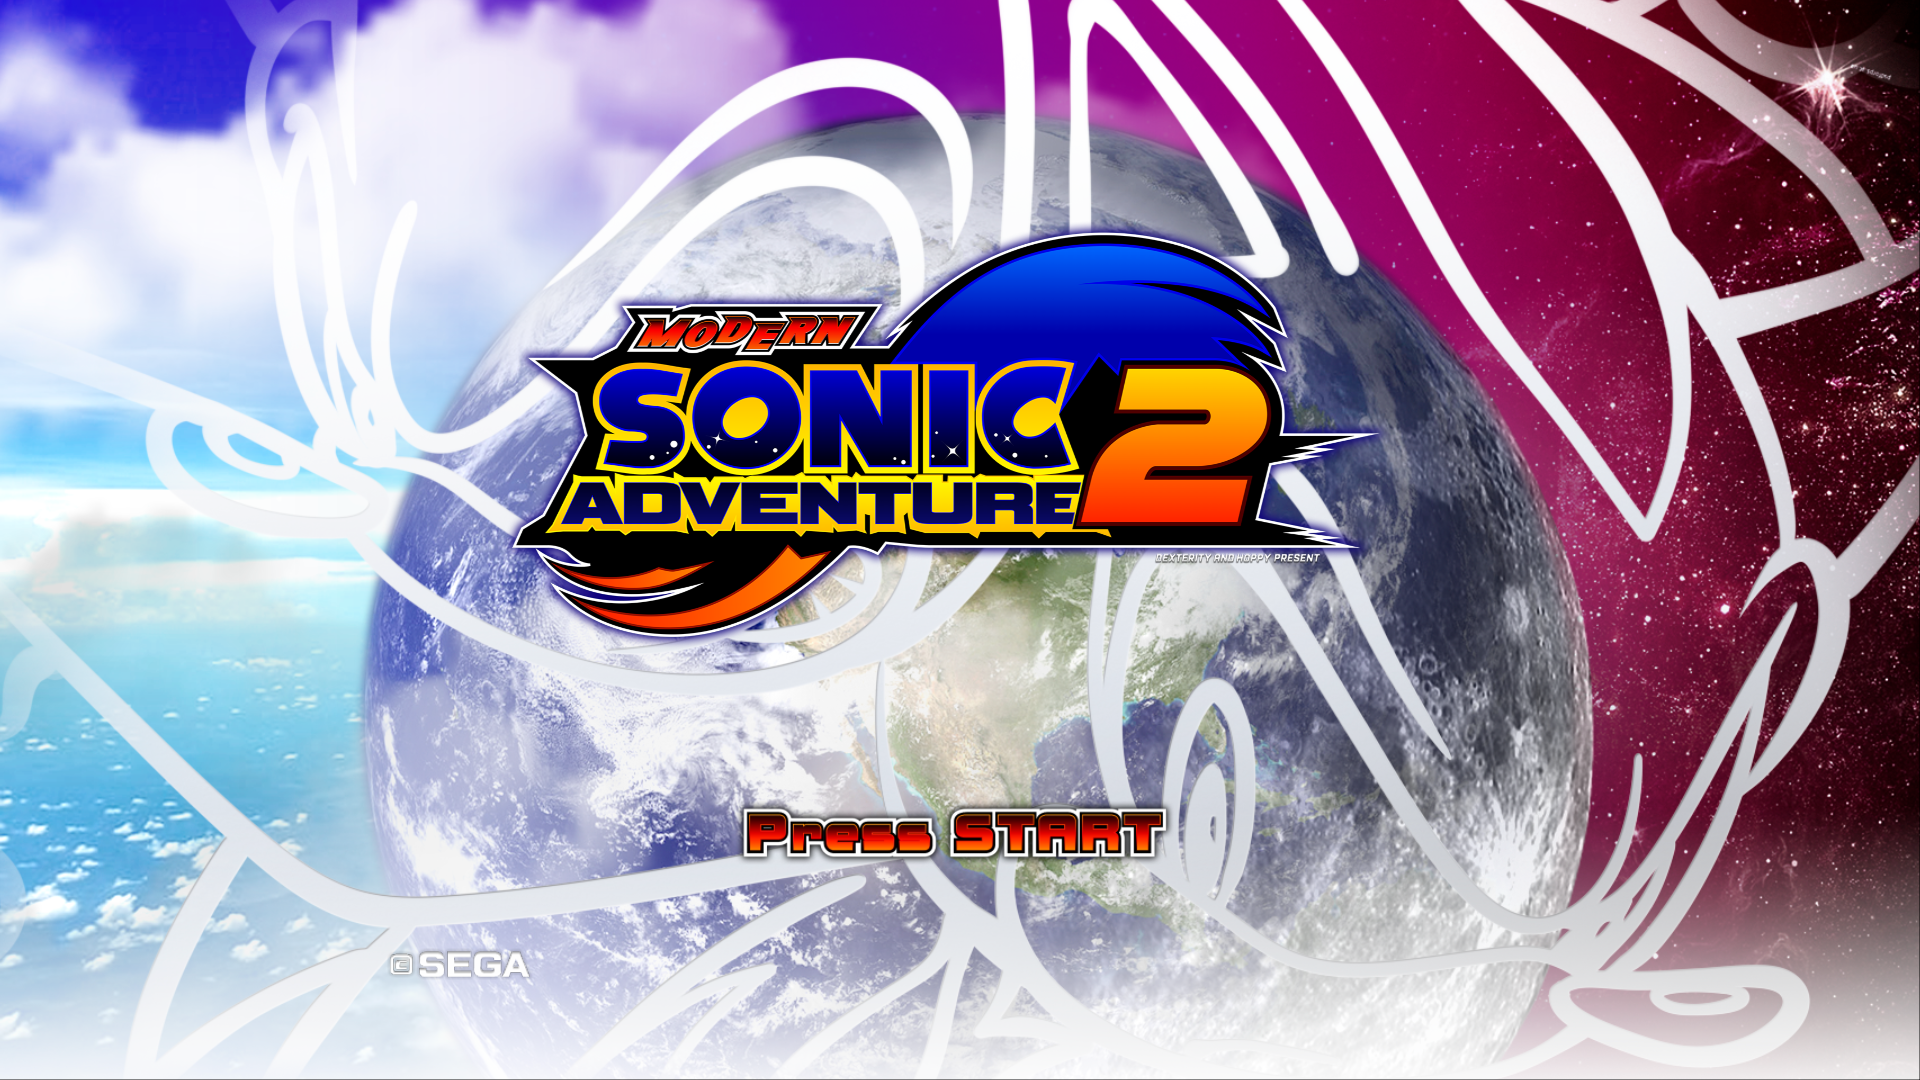 Sonic the Hedgehog News, Media, & Updates on X: Sonic Adventure 2 official  promotional logo. #SonicTheHedgehog  / X